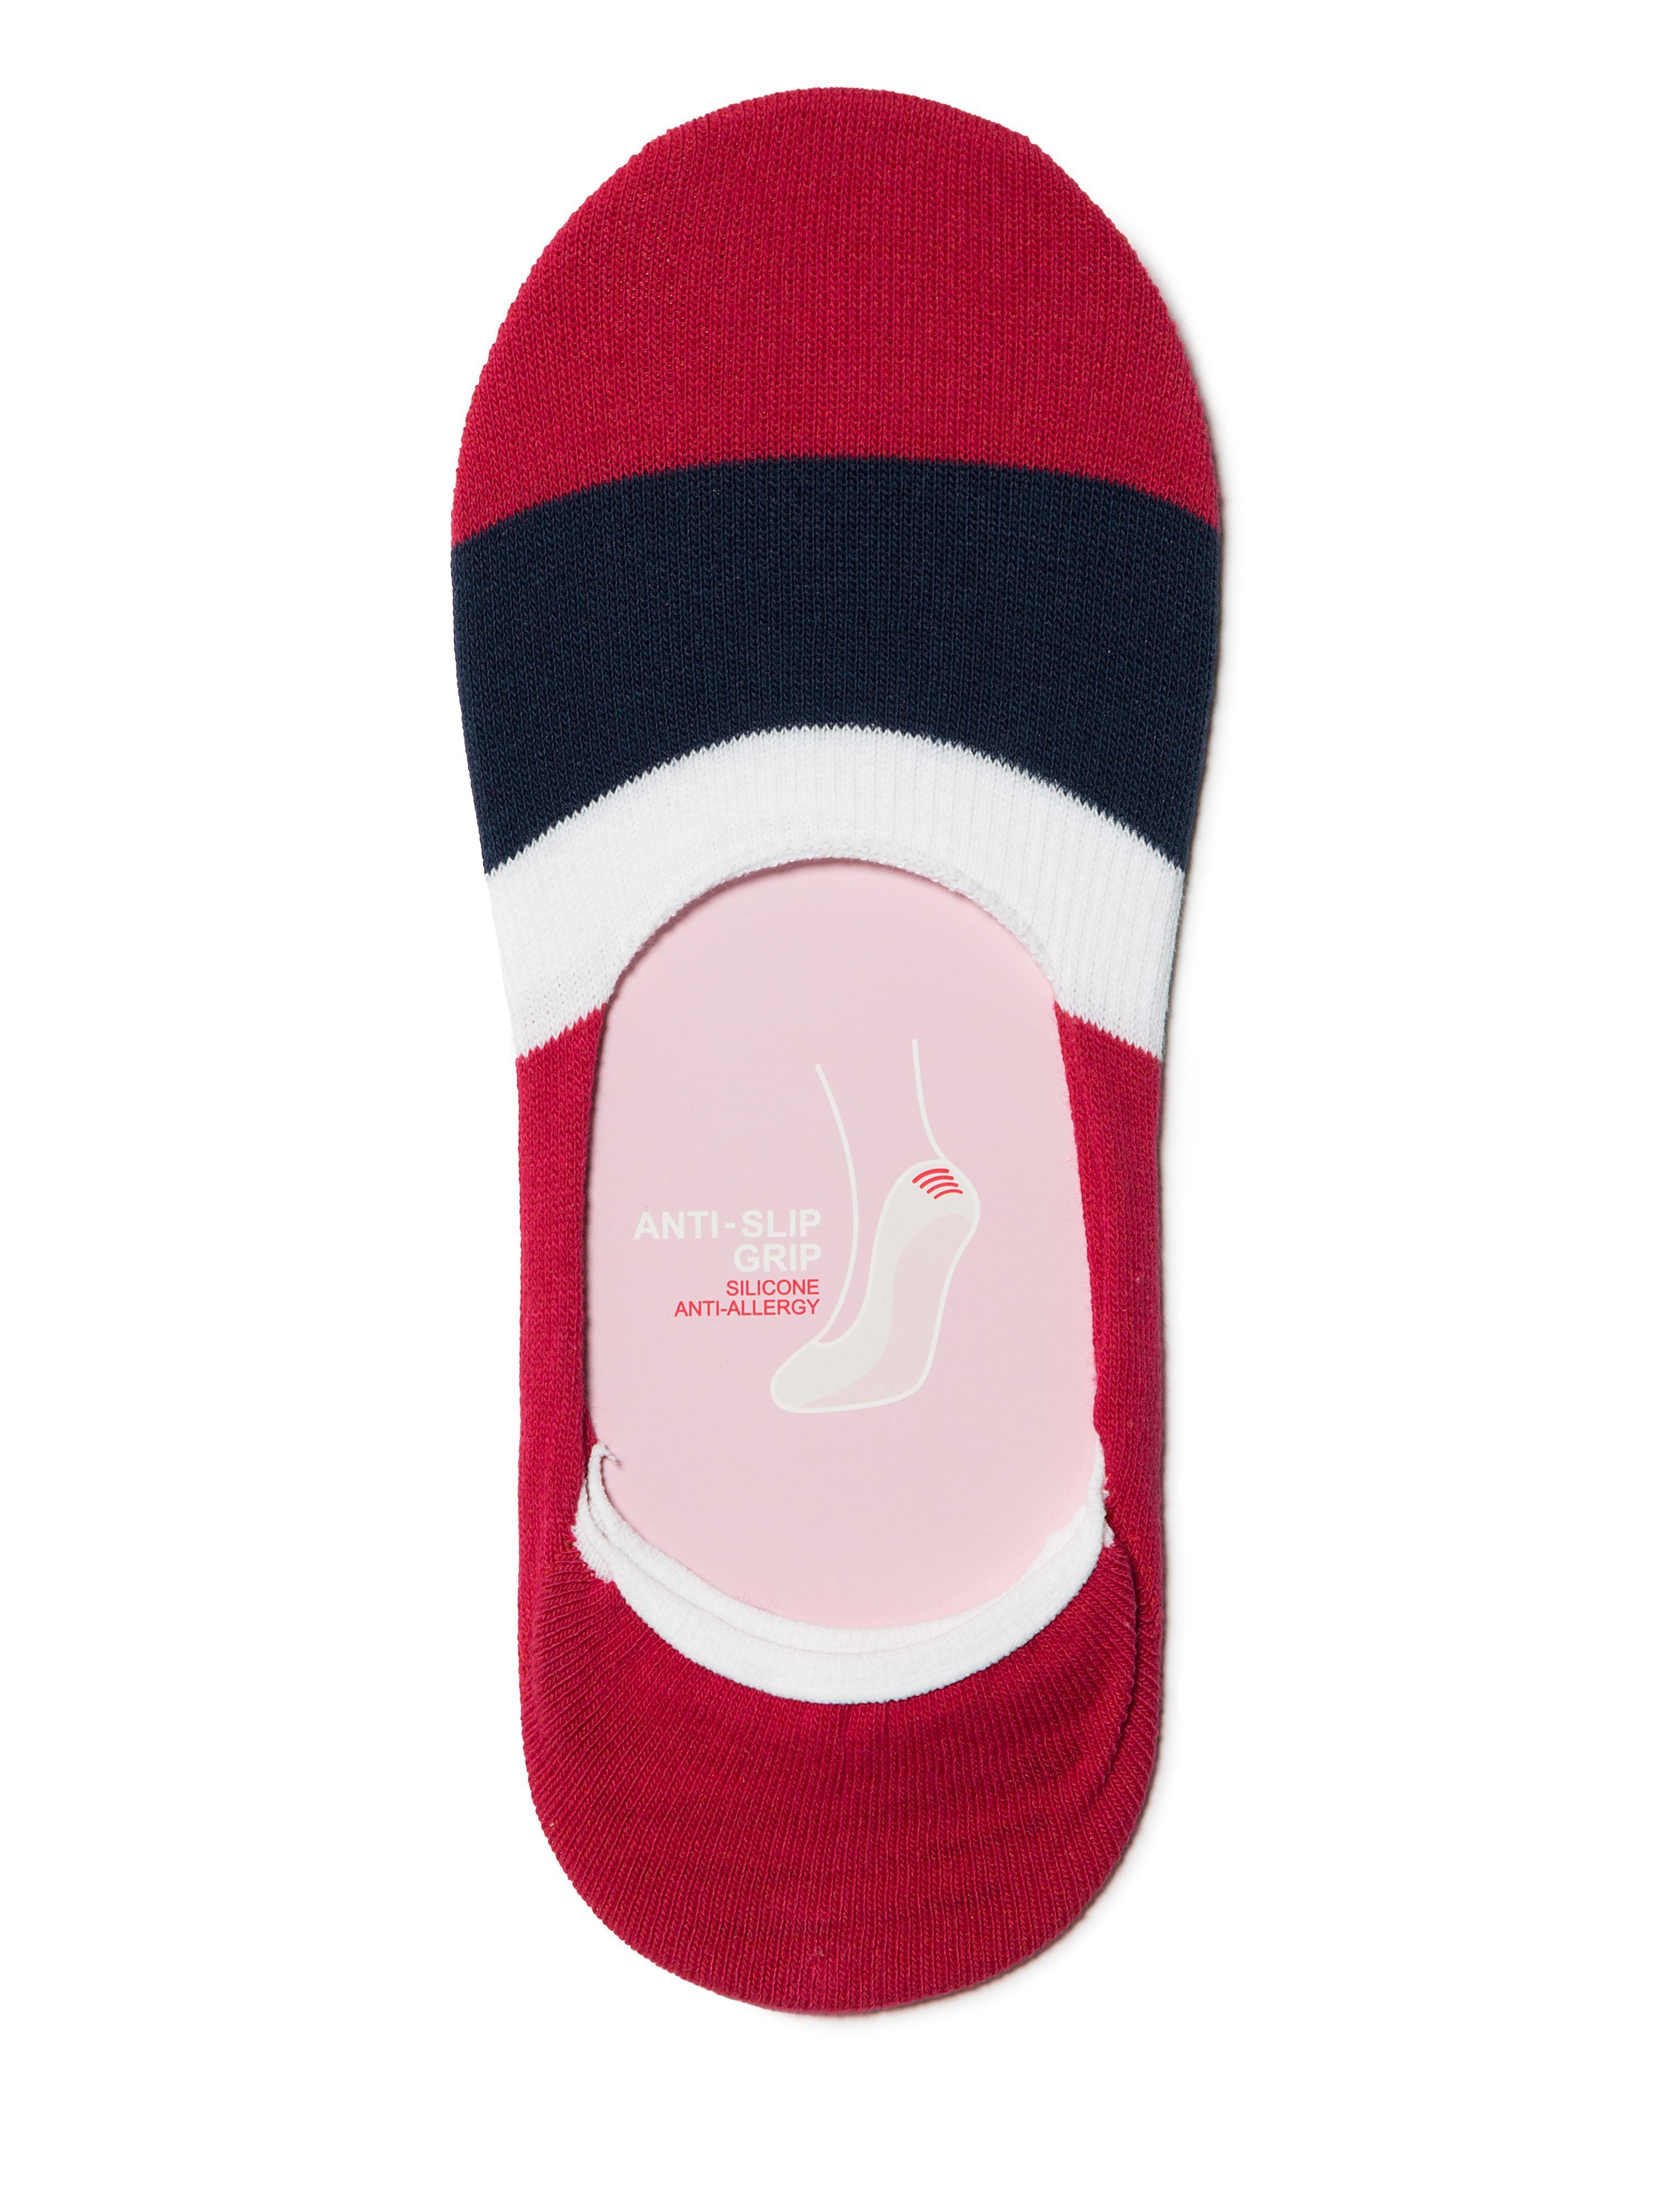 Funny and Happy women's no-show Socks red colorful Loafer Socks, no-show style socks, invisible socks